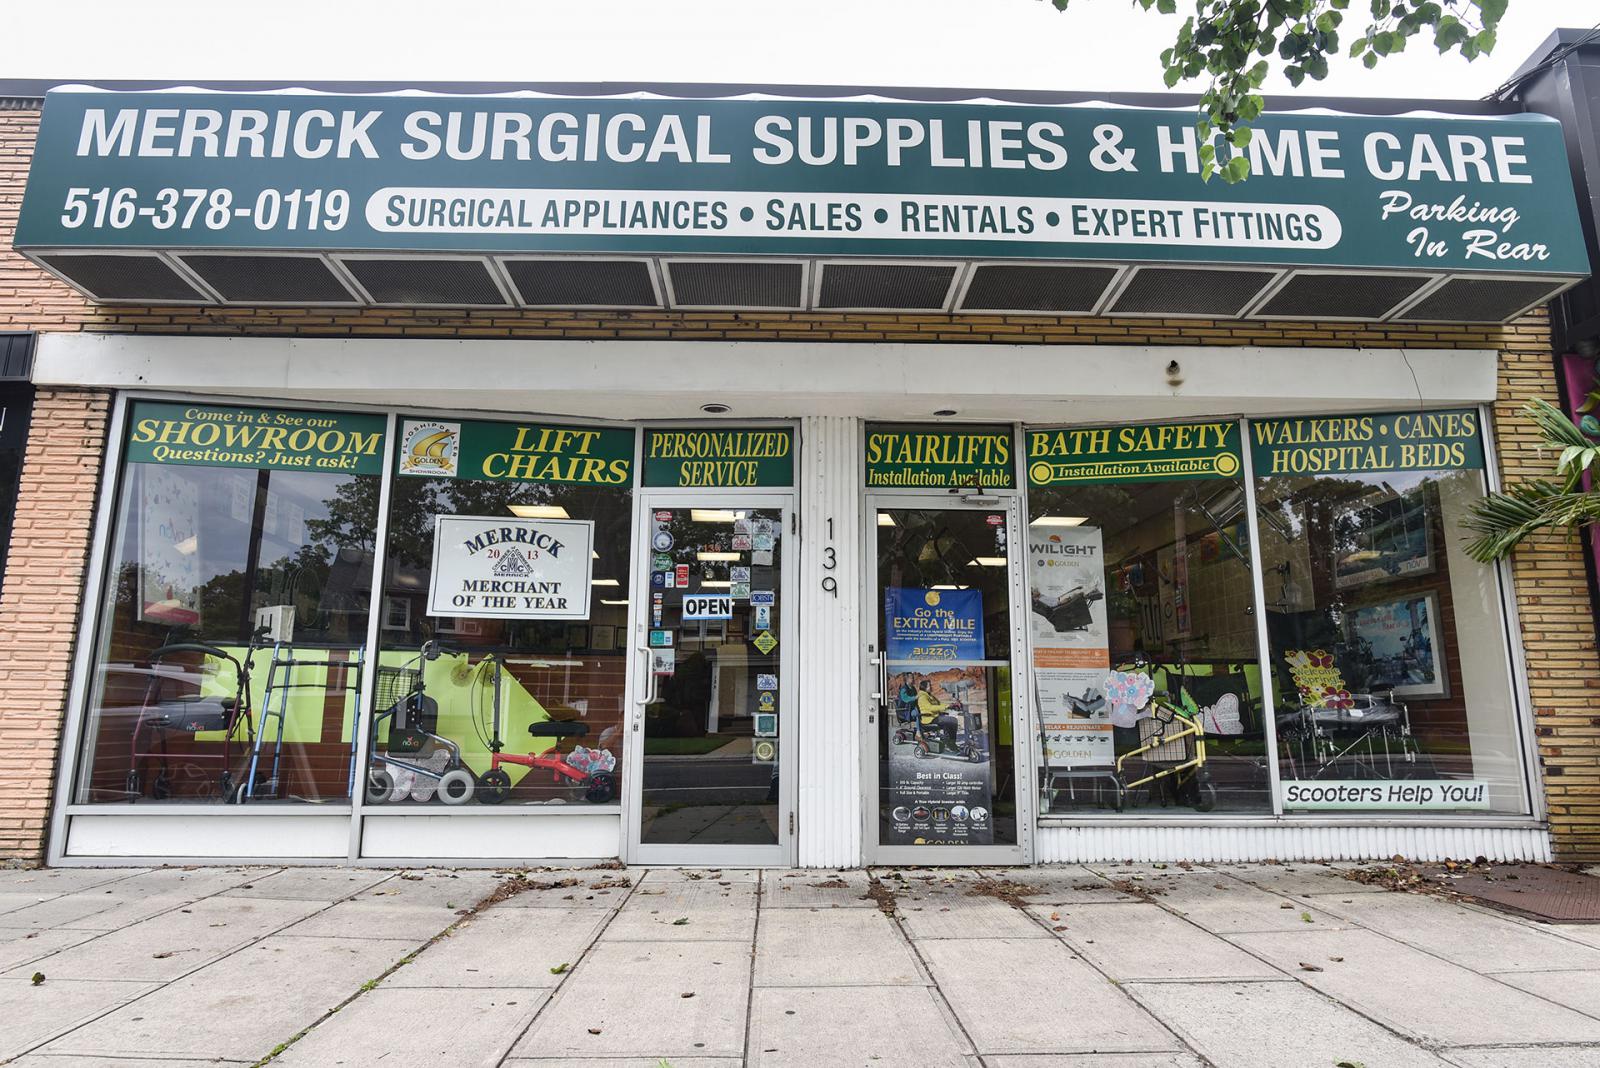 Photo featuring Merrick Surgical Supplies & Home Care store front.